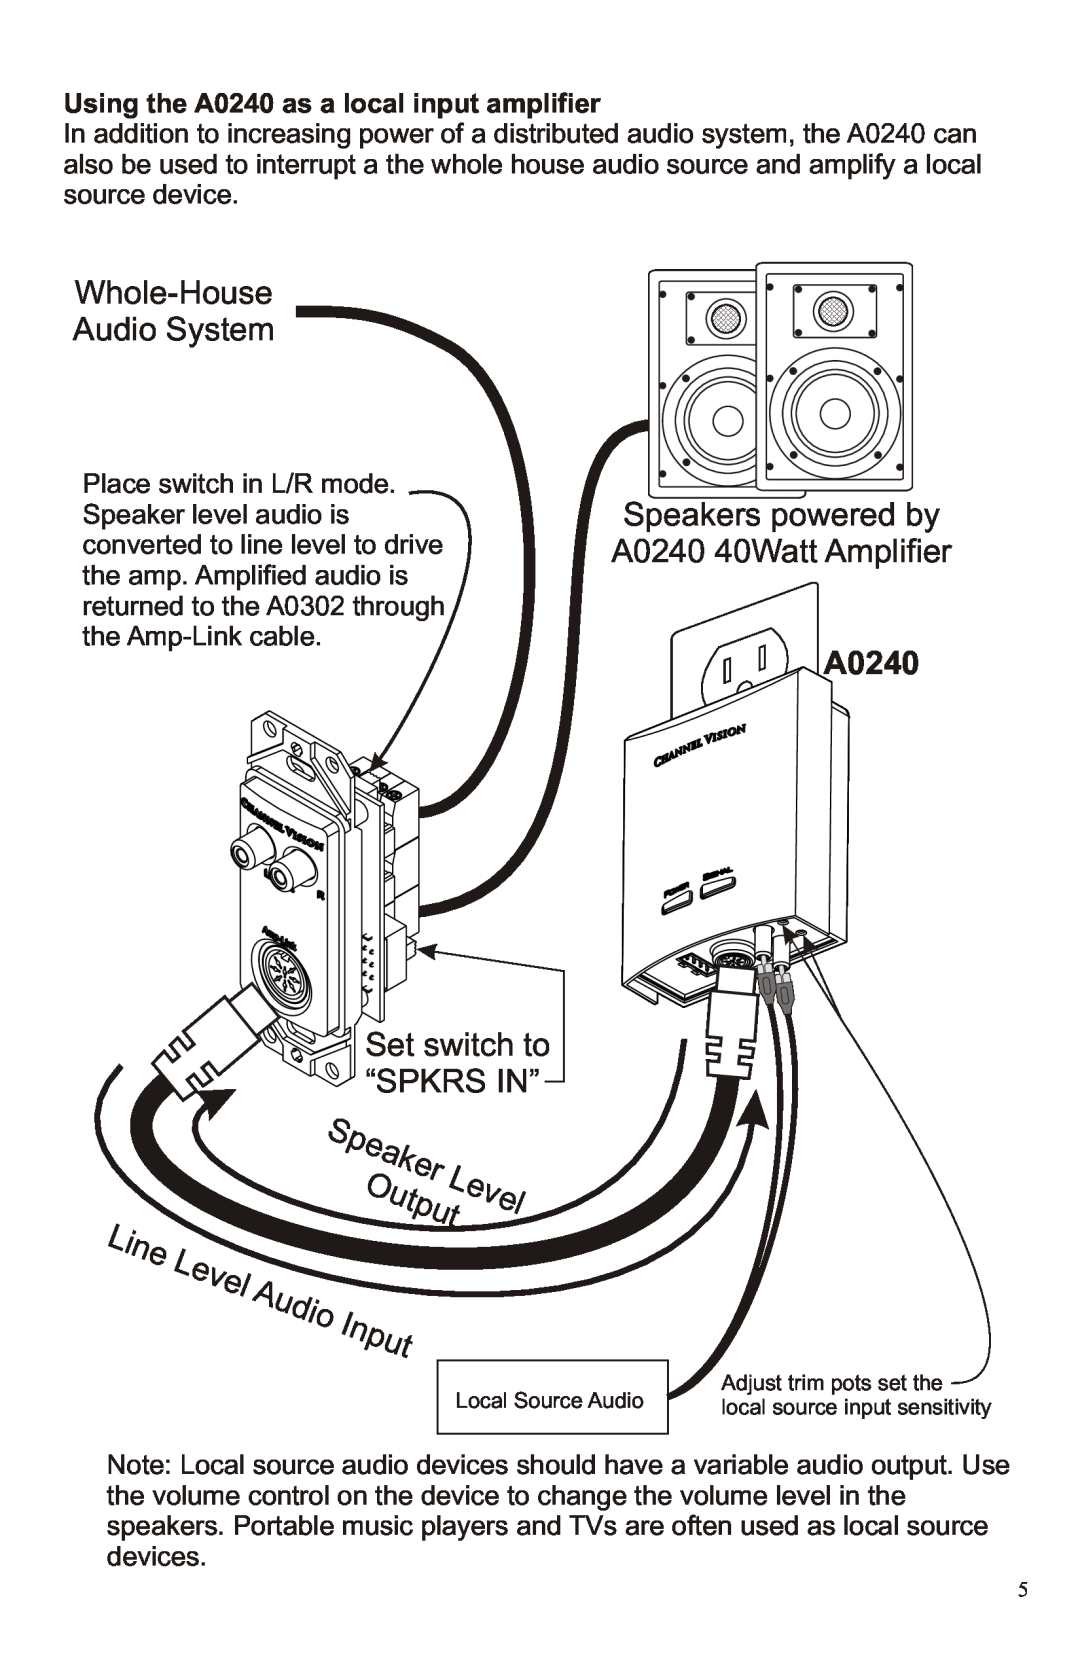 Channel Vision manual Line L evel Audio Input, r Le, Using the A0240 as a local input amplifier 